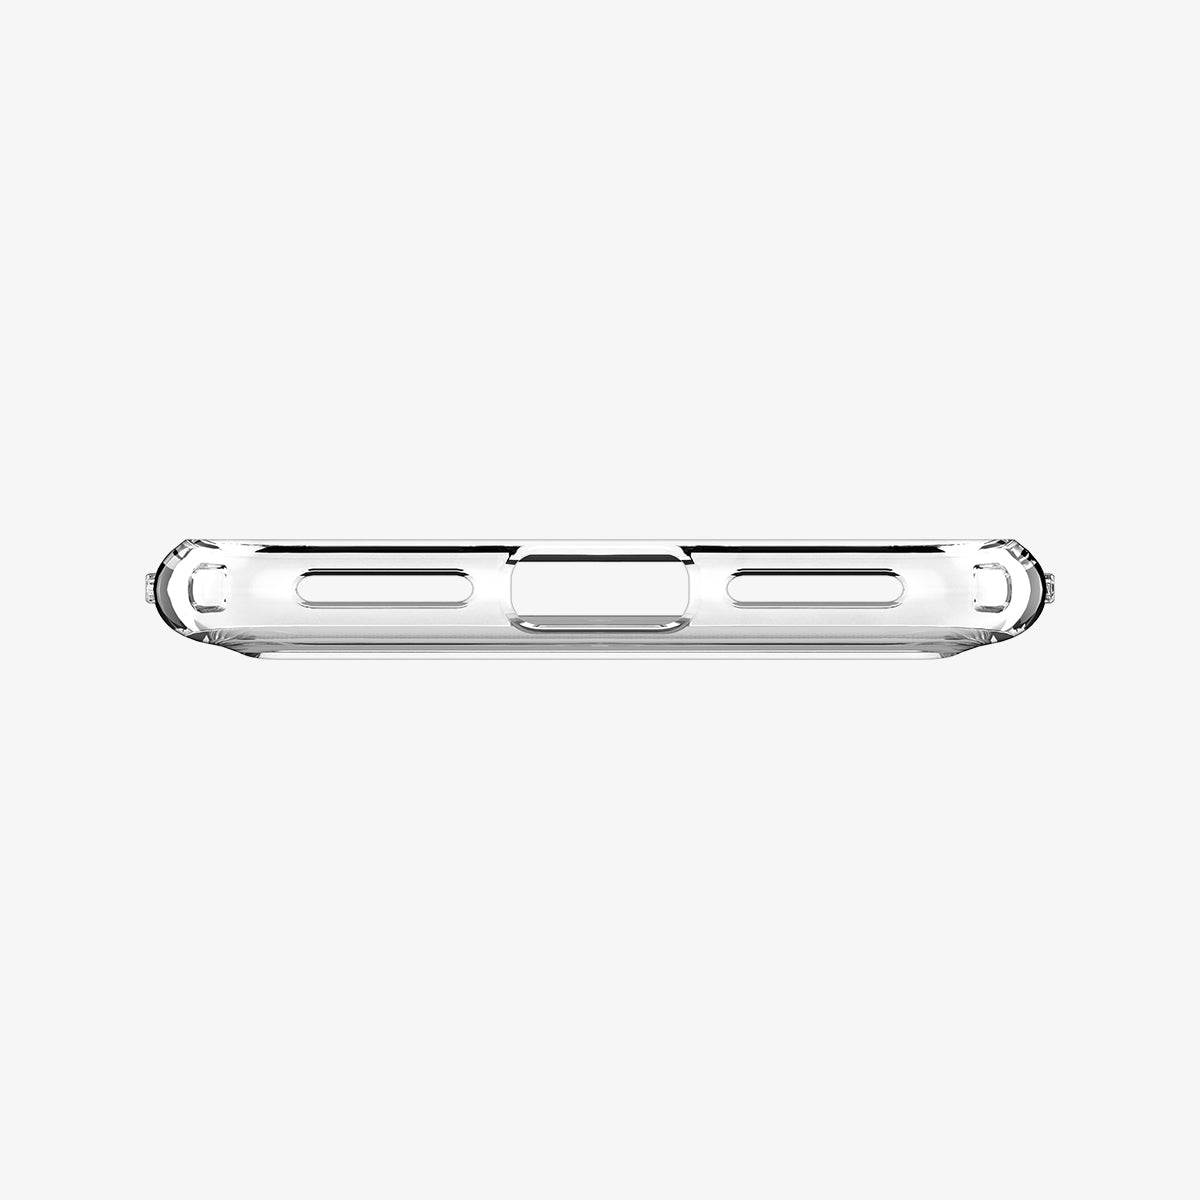 ACS04359 - iPhone SE Card Slot Case in crystal clear showing the bottom ports